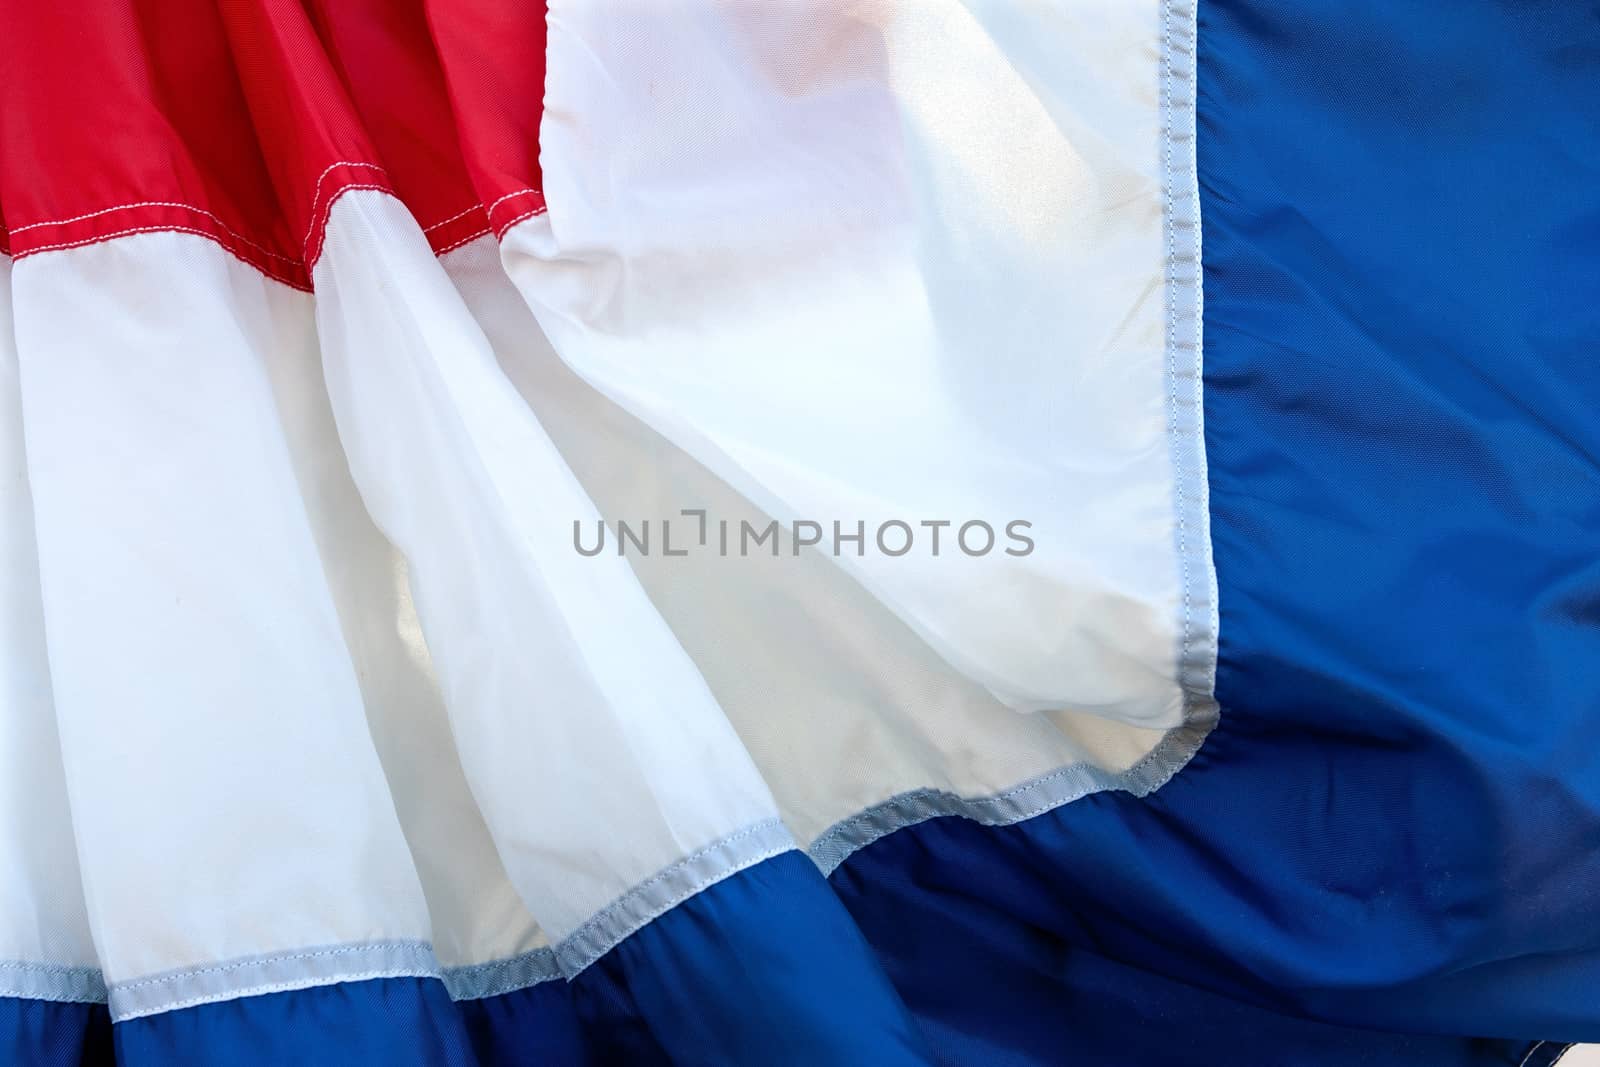 Fabric of red, white, and blue banner fills the frame